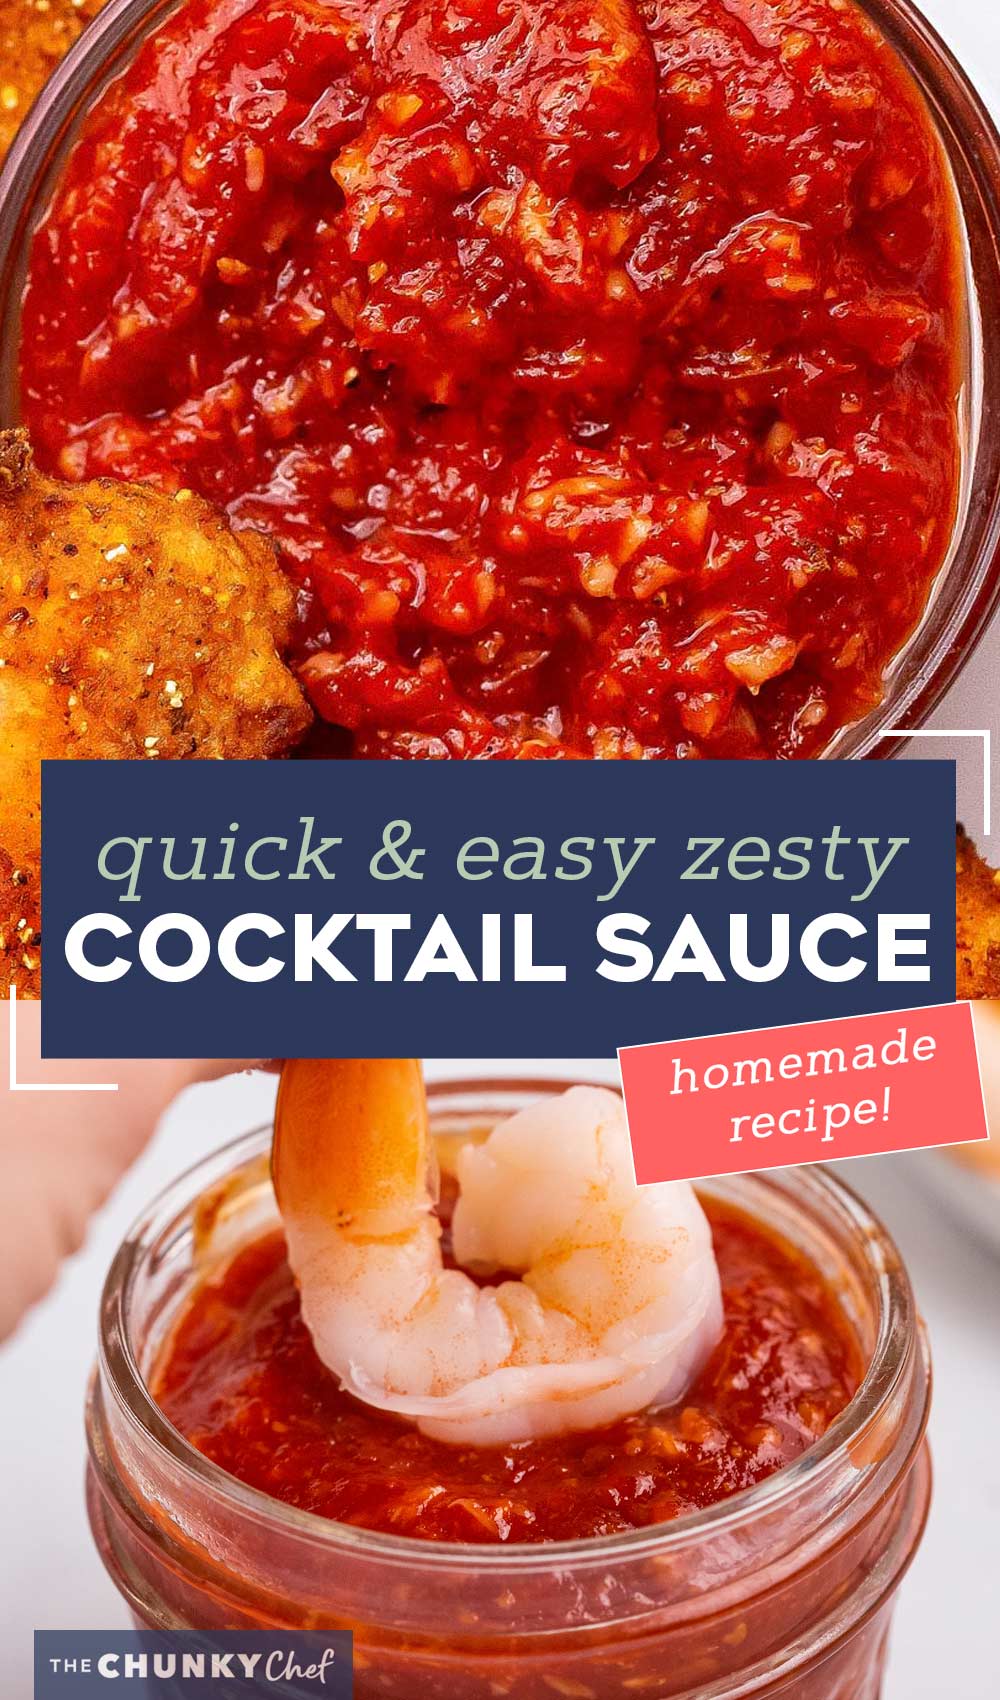 Homemade Cocktail Sauce - The Chunky Chef